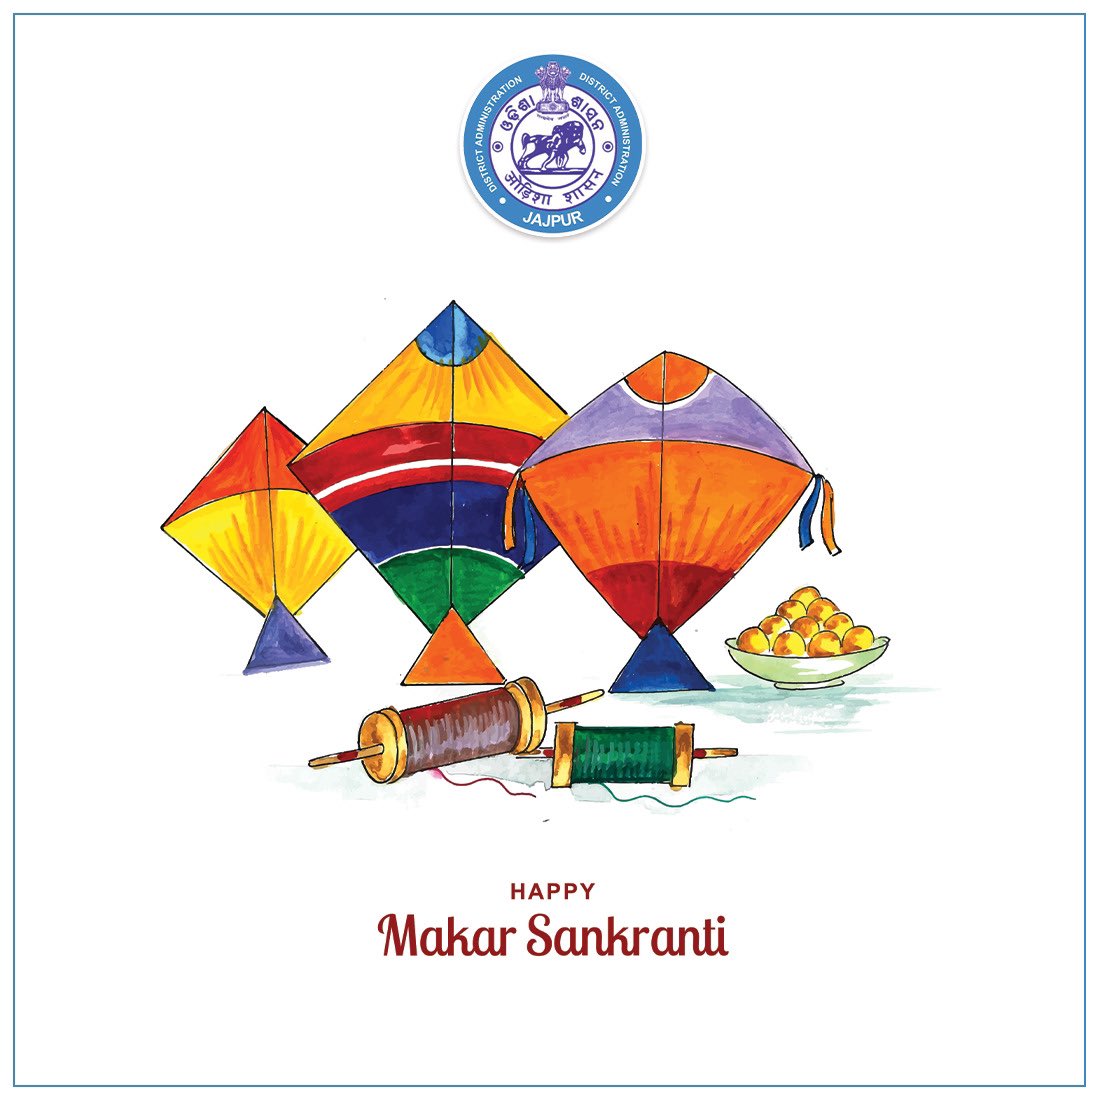 May all your wishes come true and you live in harmony. Wishing you a very Happy Makar Sankranti!